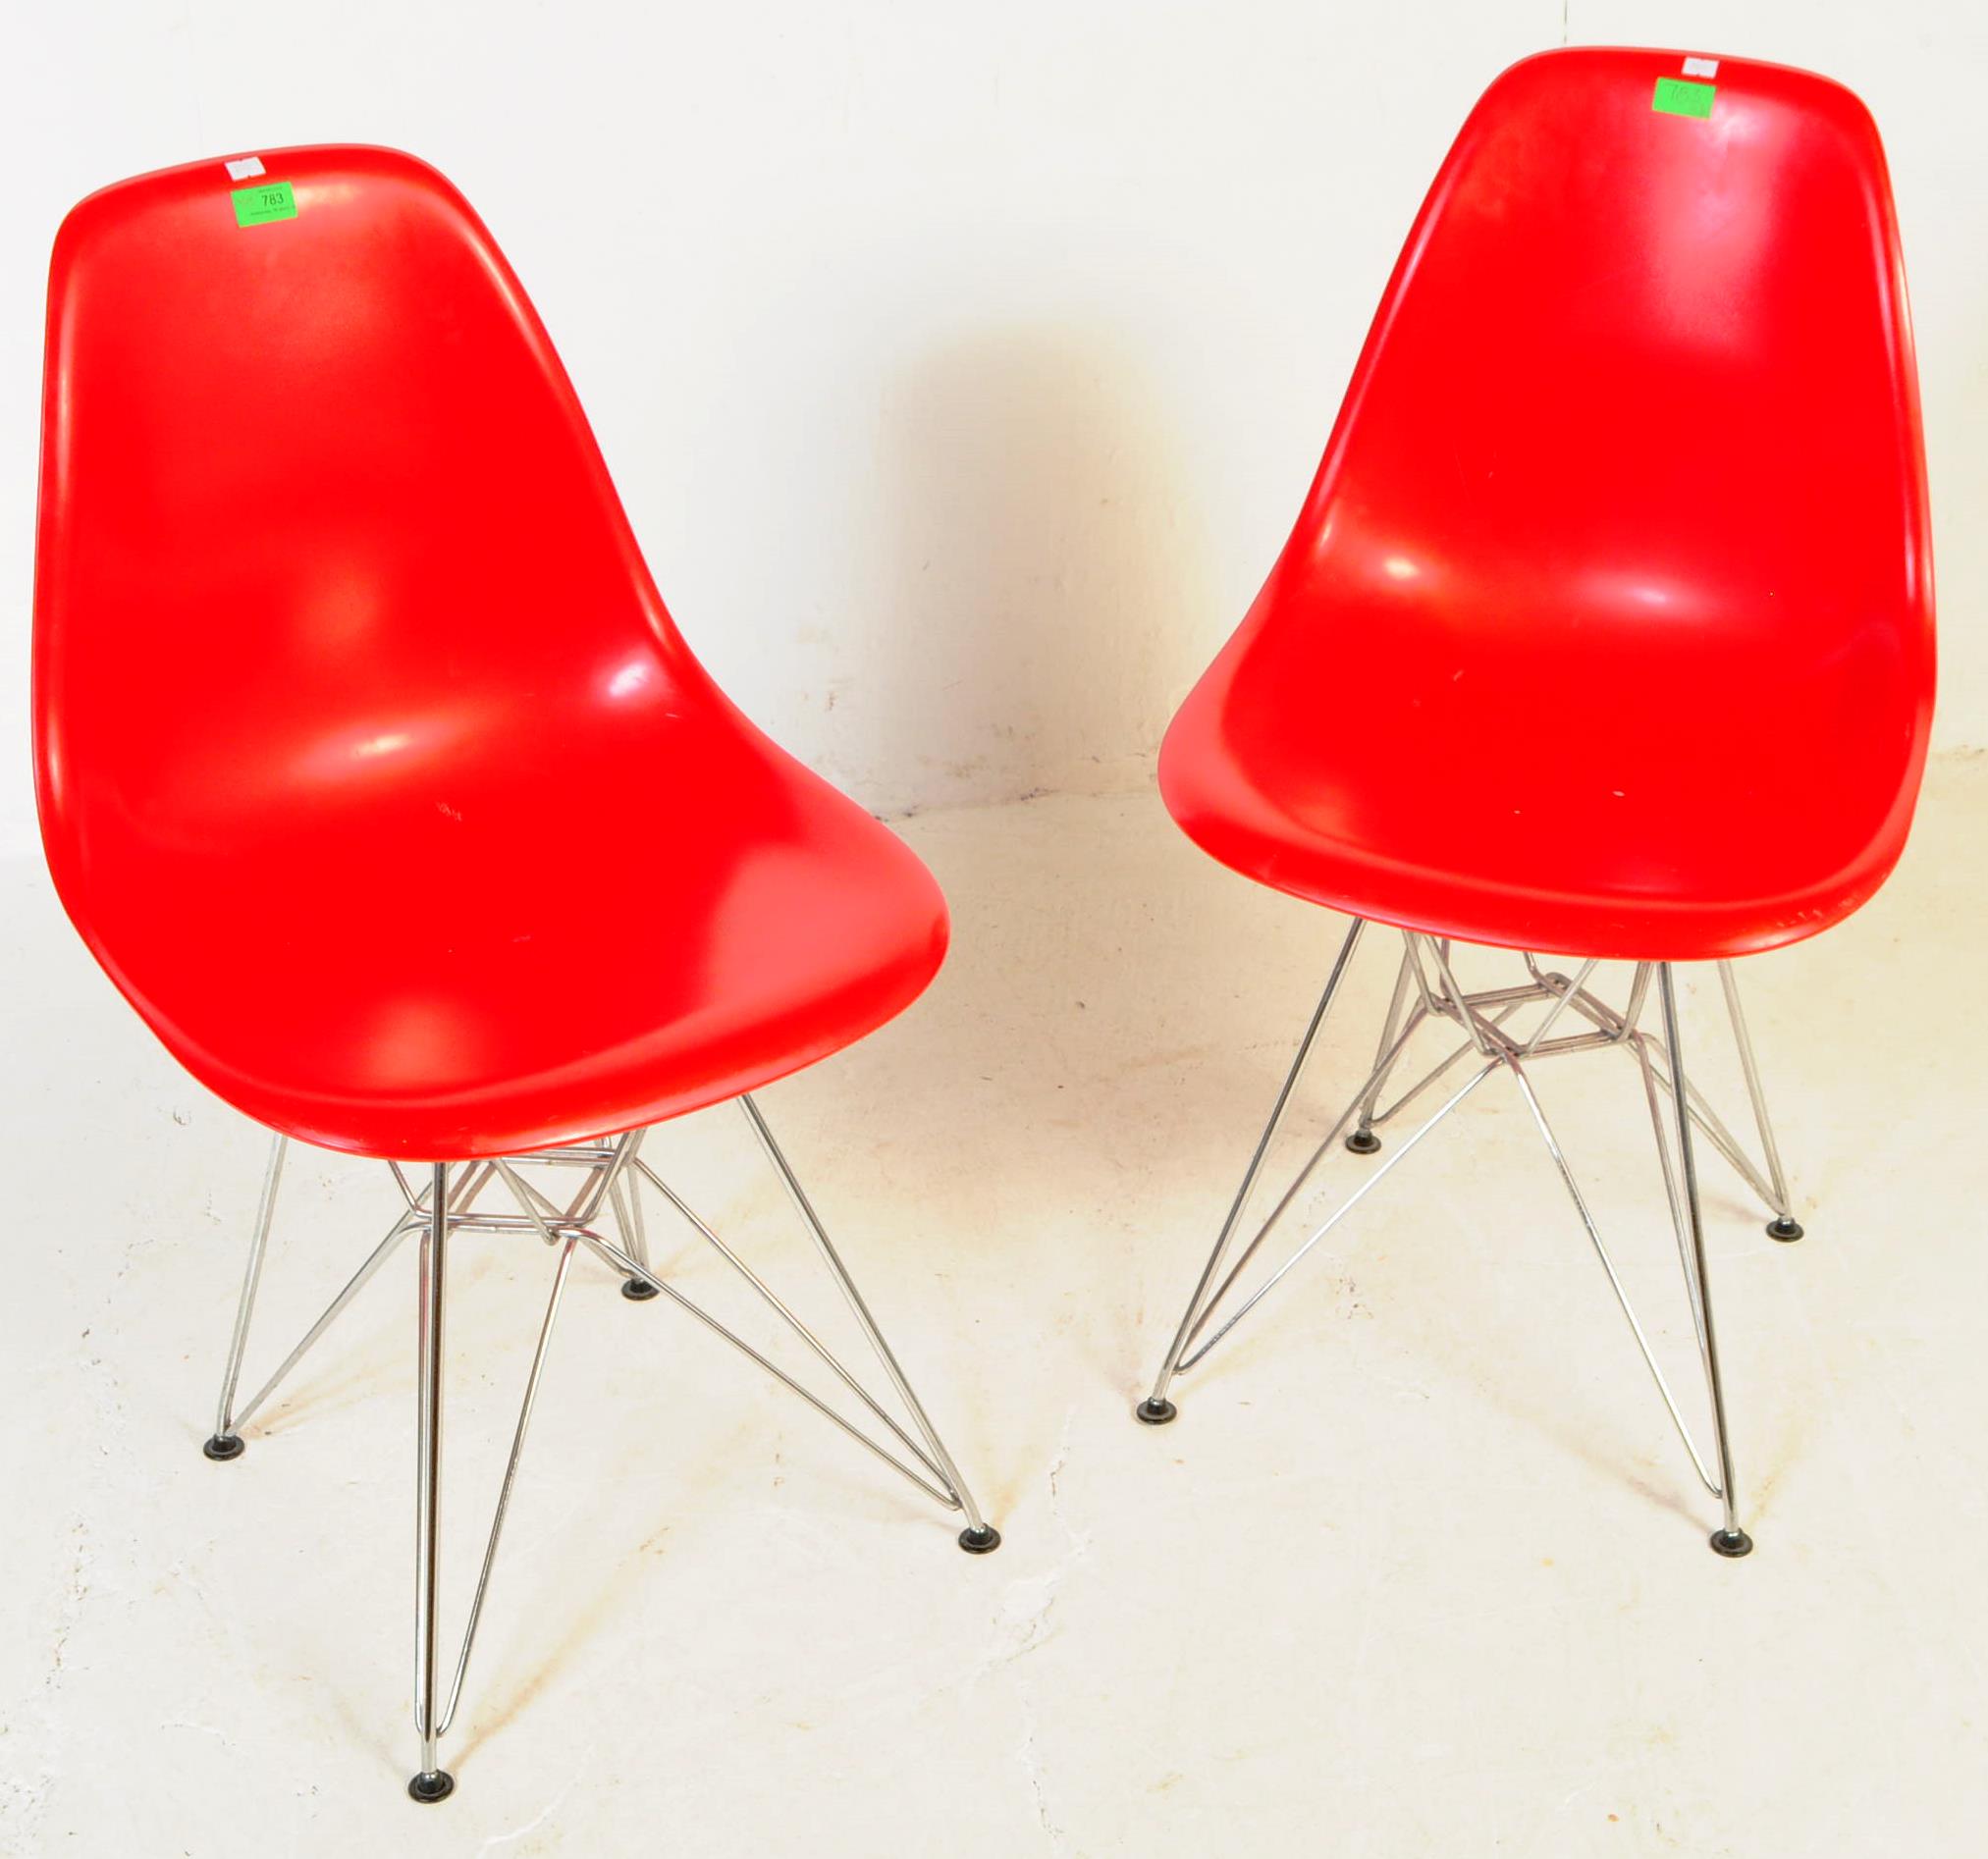 MATCHING PAIR OF CONTEMPORARY DSW STYLE CHAIRS - Image 2 of 5